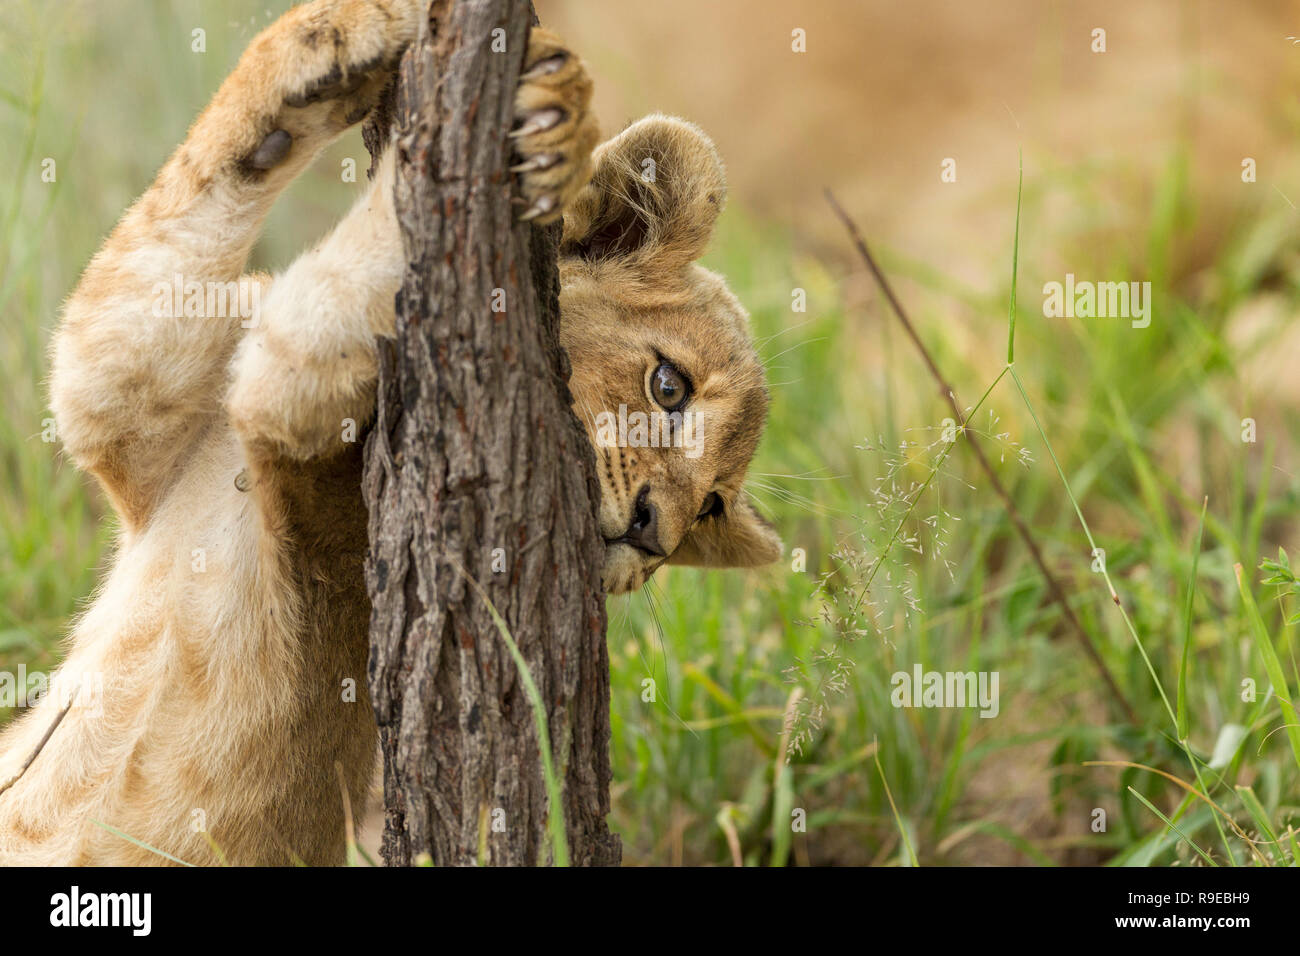 cute little lion cub playing and holding treestump Stock Photo